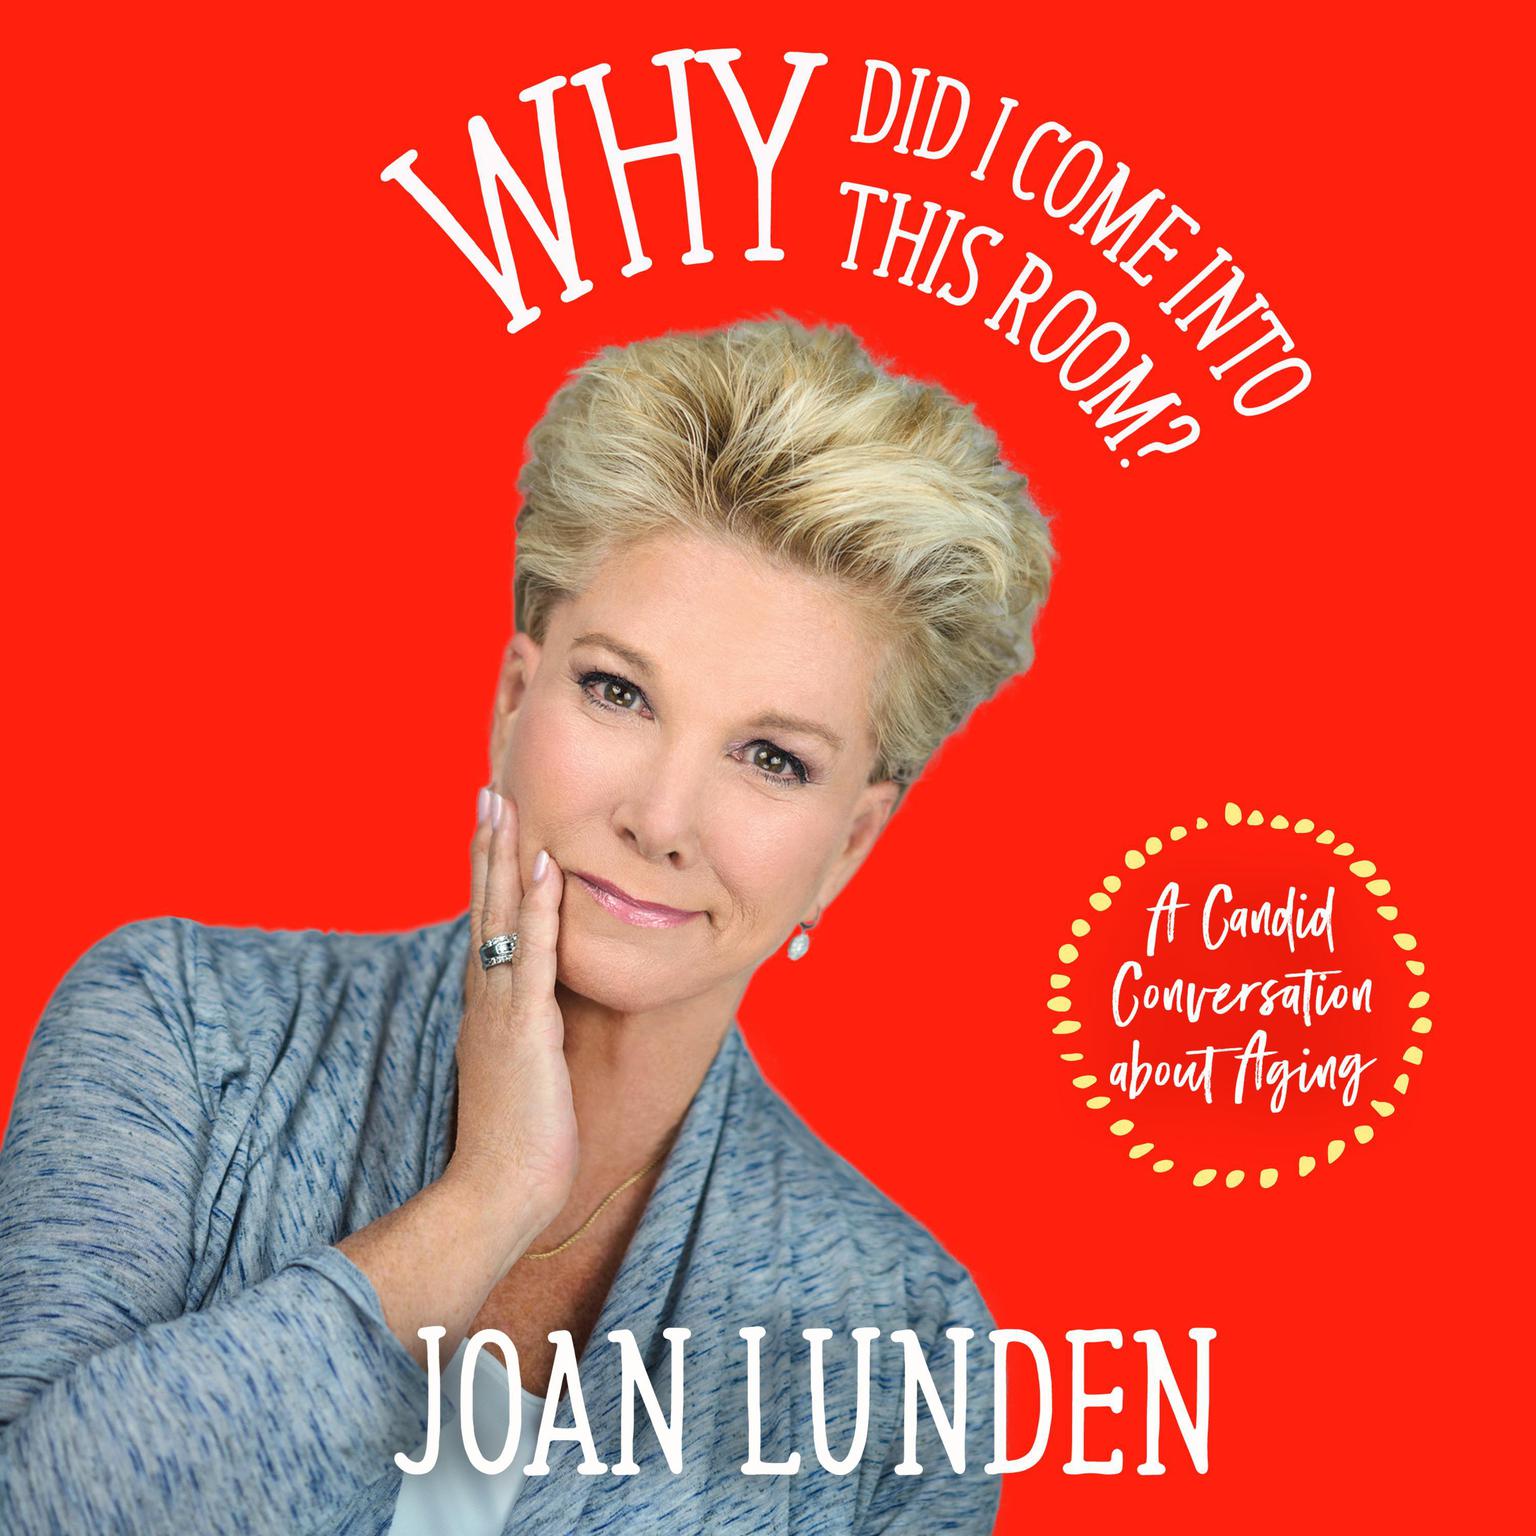 Why Did I Come into This Room?: A Candid Conversation about Aging Audiobook, by Joan Lunden